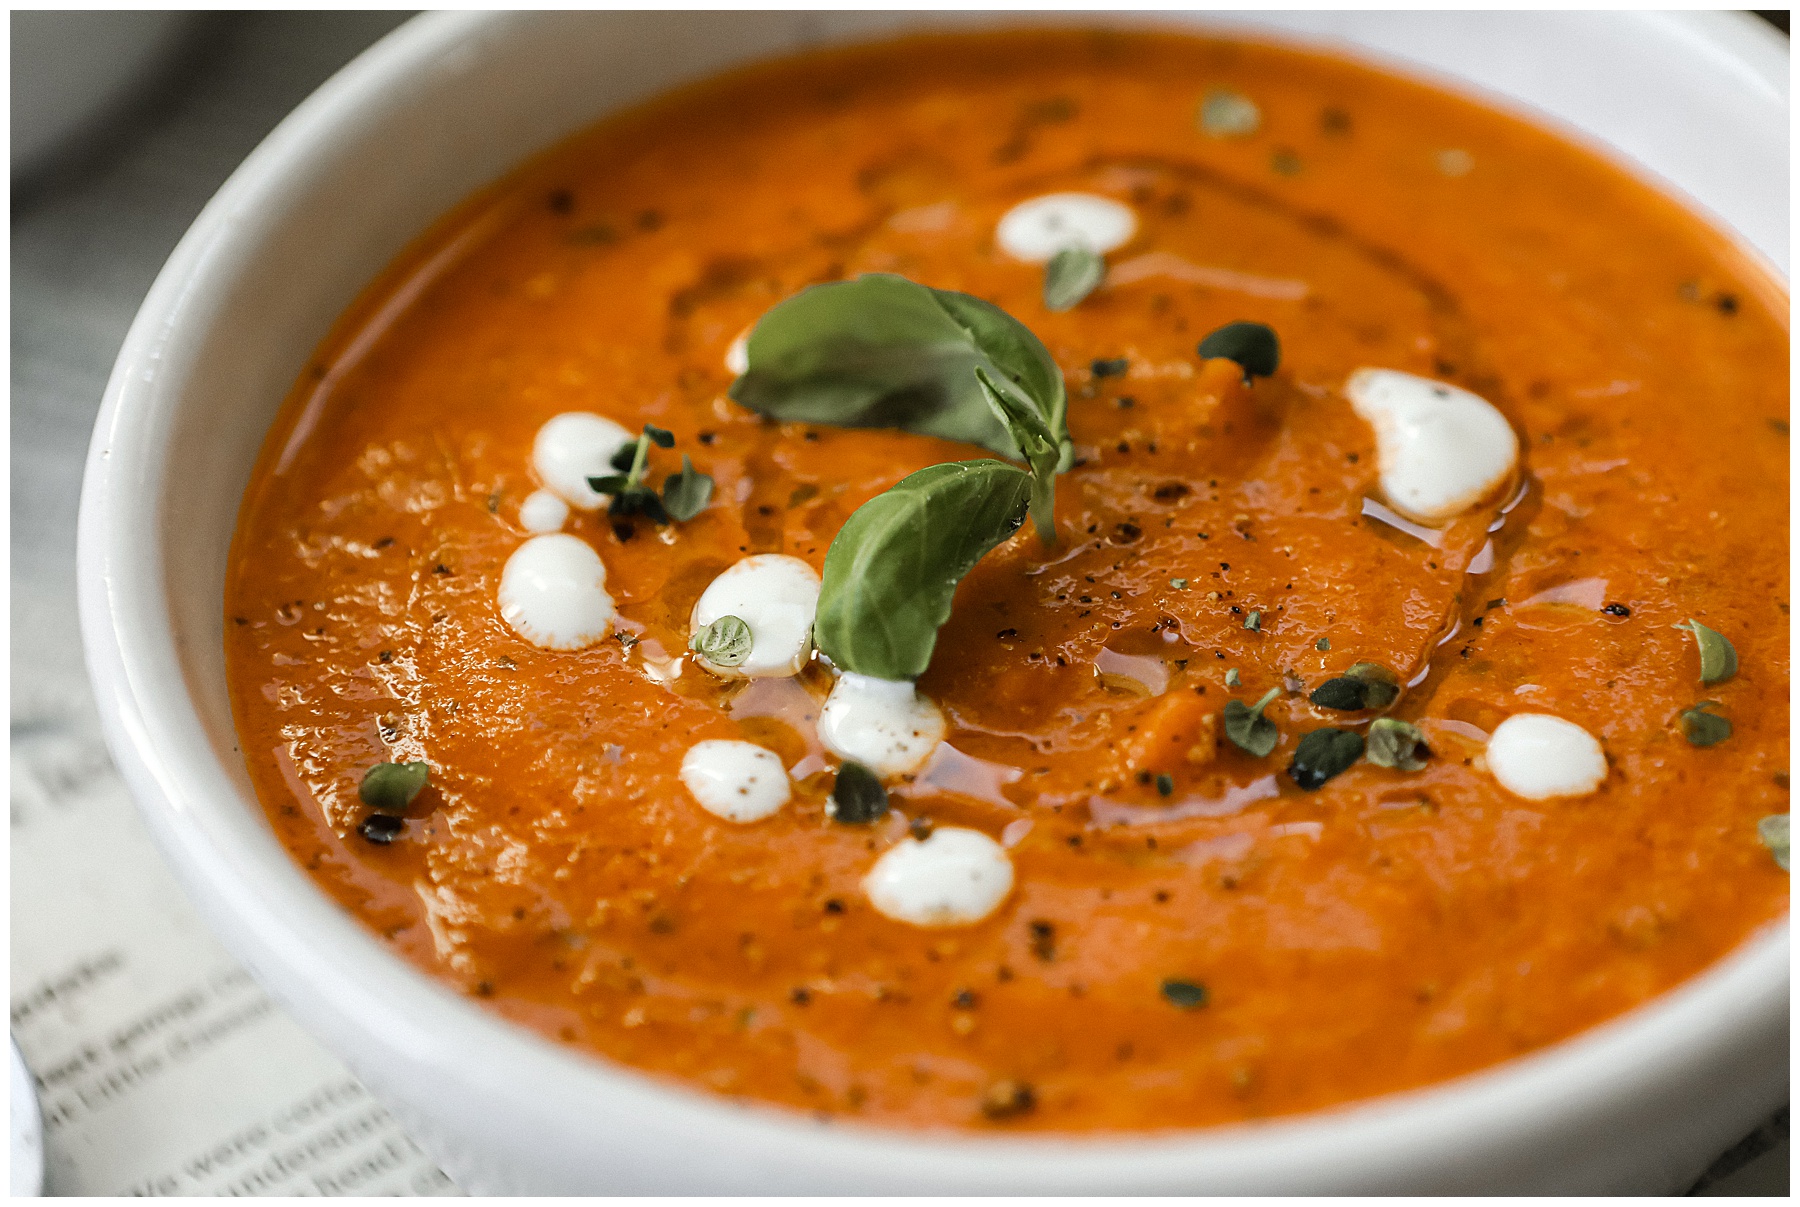 Creamy tomato soup with basil